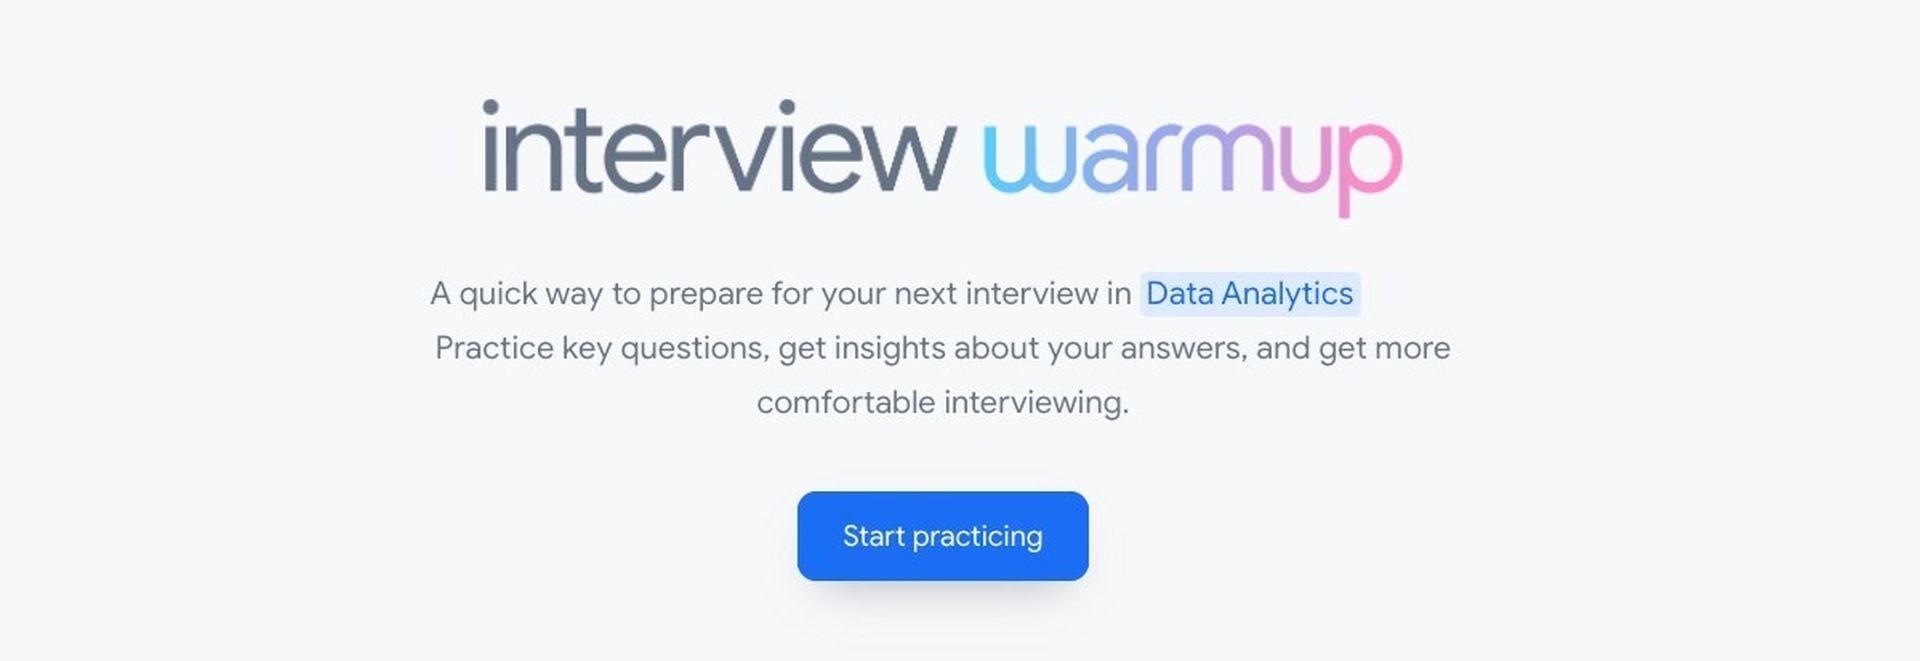 If you are feeling nervous before a job interview, the new AI tool called Google Interview Warmup will help you to practice beforehand. Google now has a tool to assist candidates in practicing job interviews. It's true that job interviews can be stressful. You may practice and be more prepared before going into an interview thanks to Google's new tool.